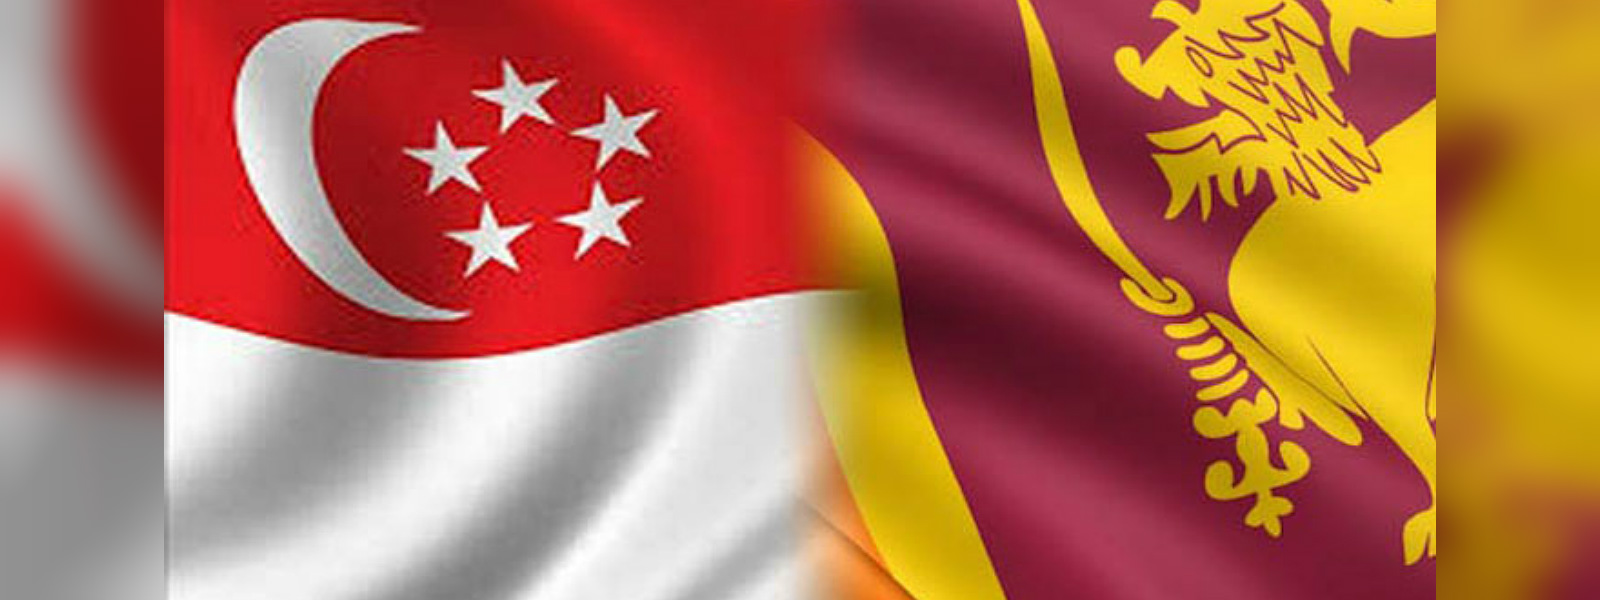 Singapore warns on non-essential travel to SL